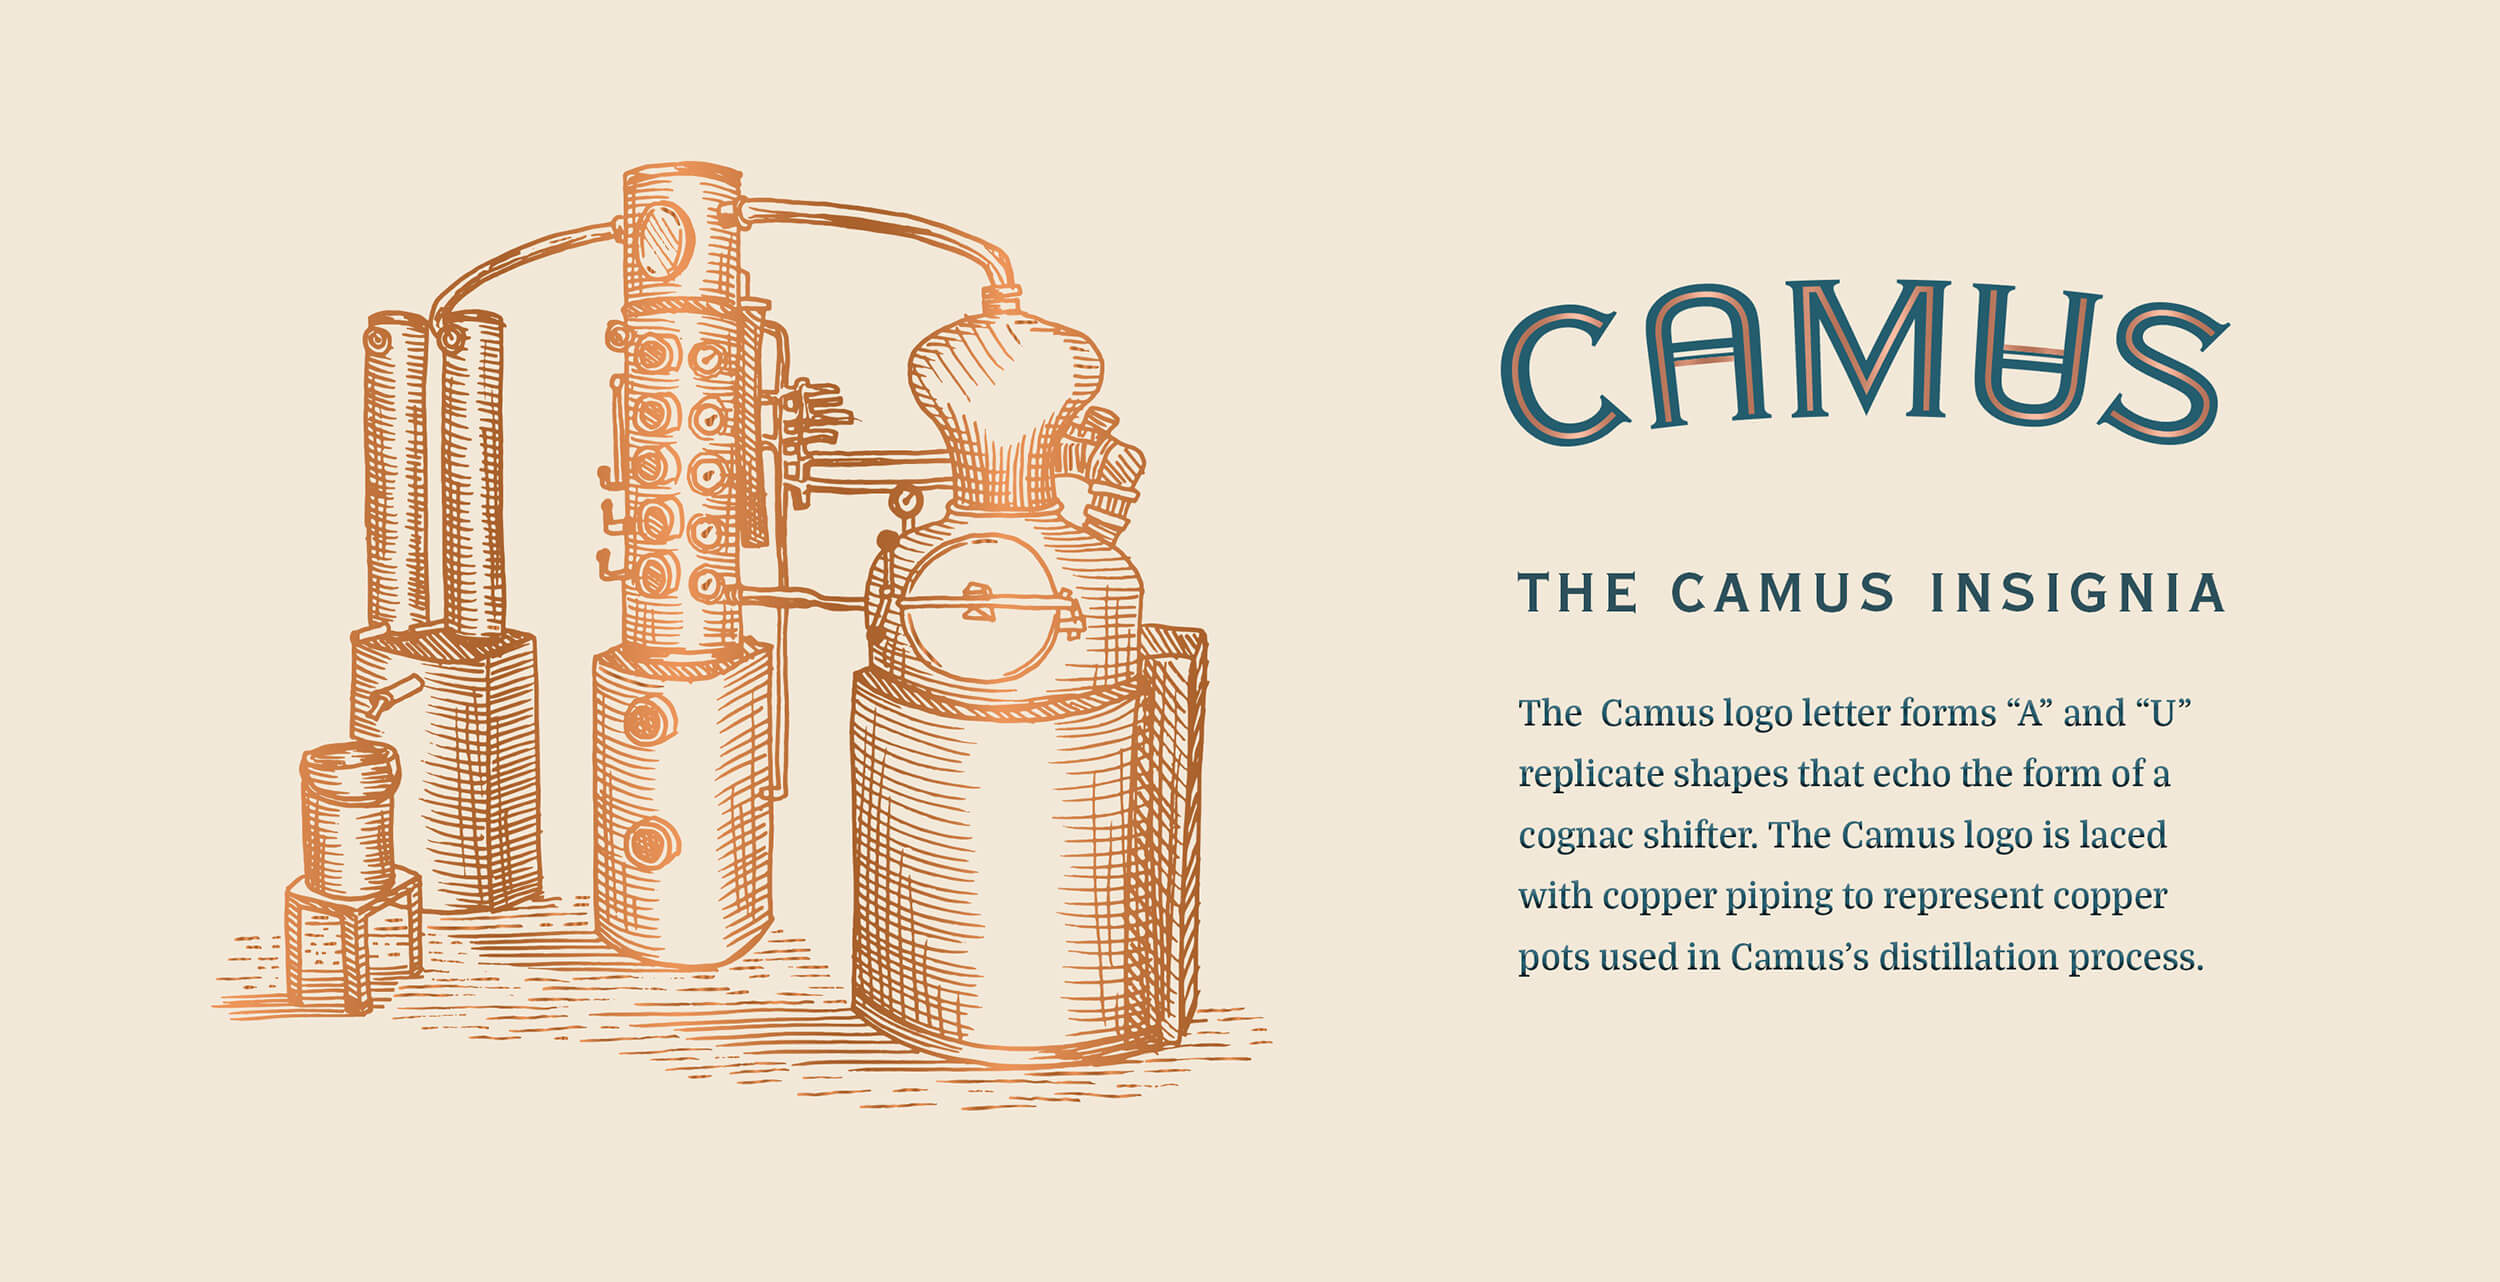 Camus bottle package redesign